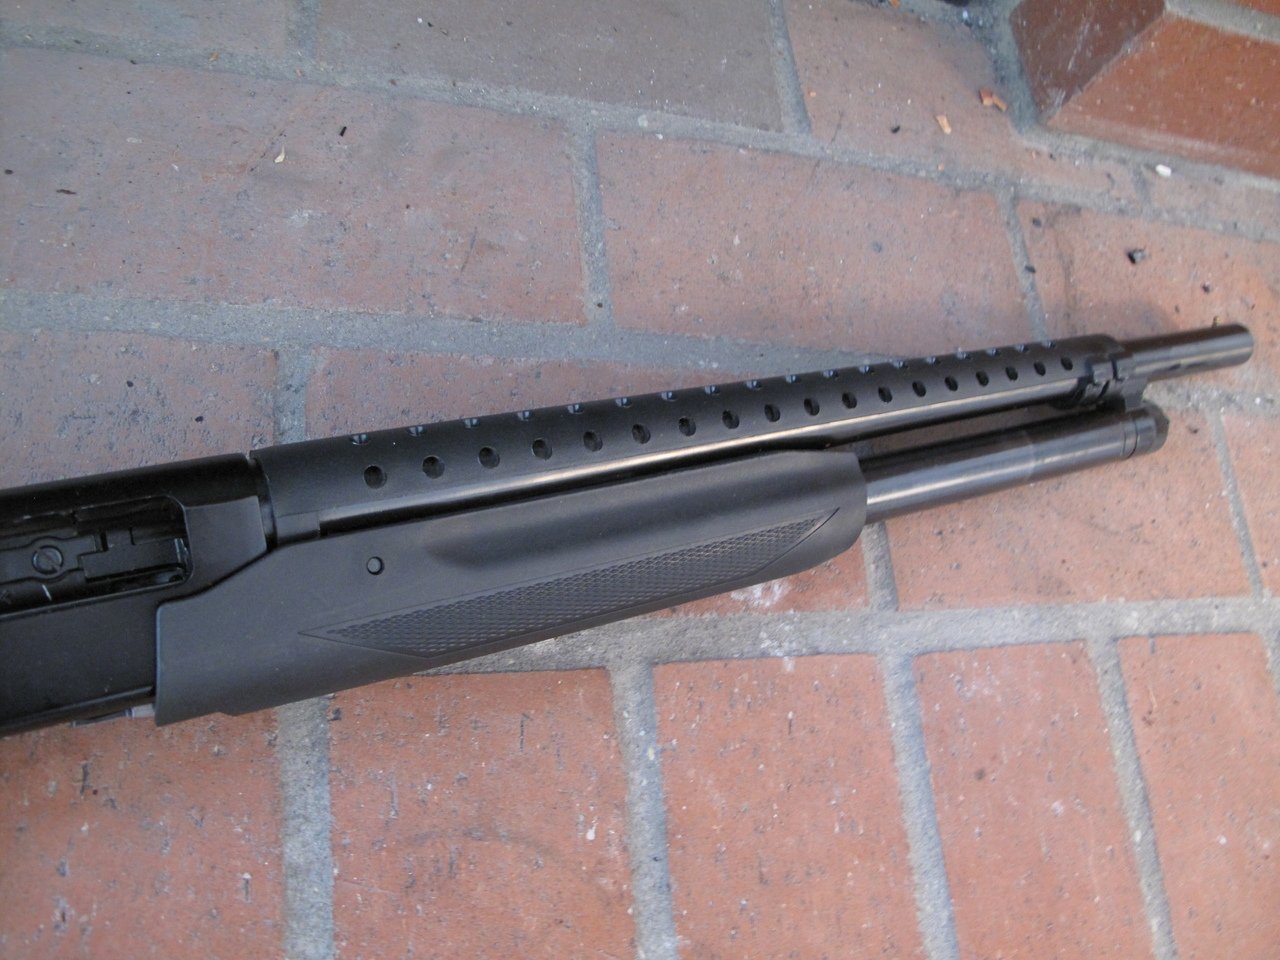 Enhancing Your Remington 870: The Best Tactical Heat Shield Options